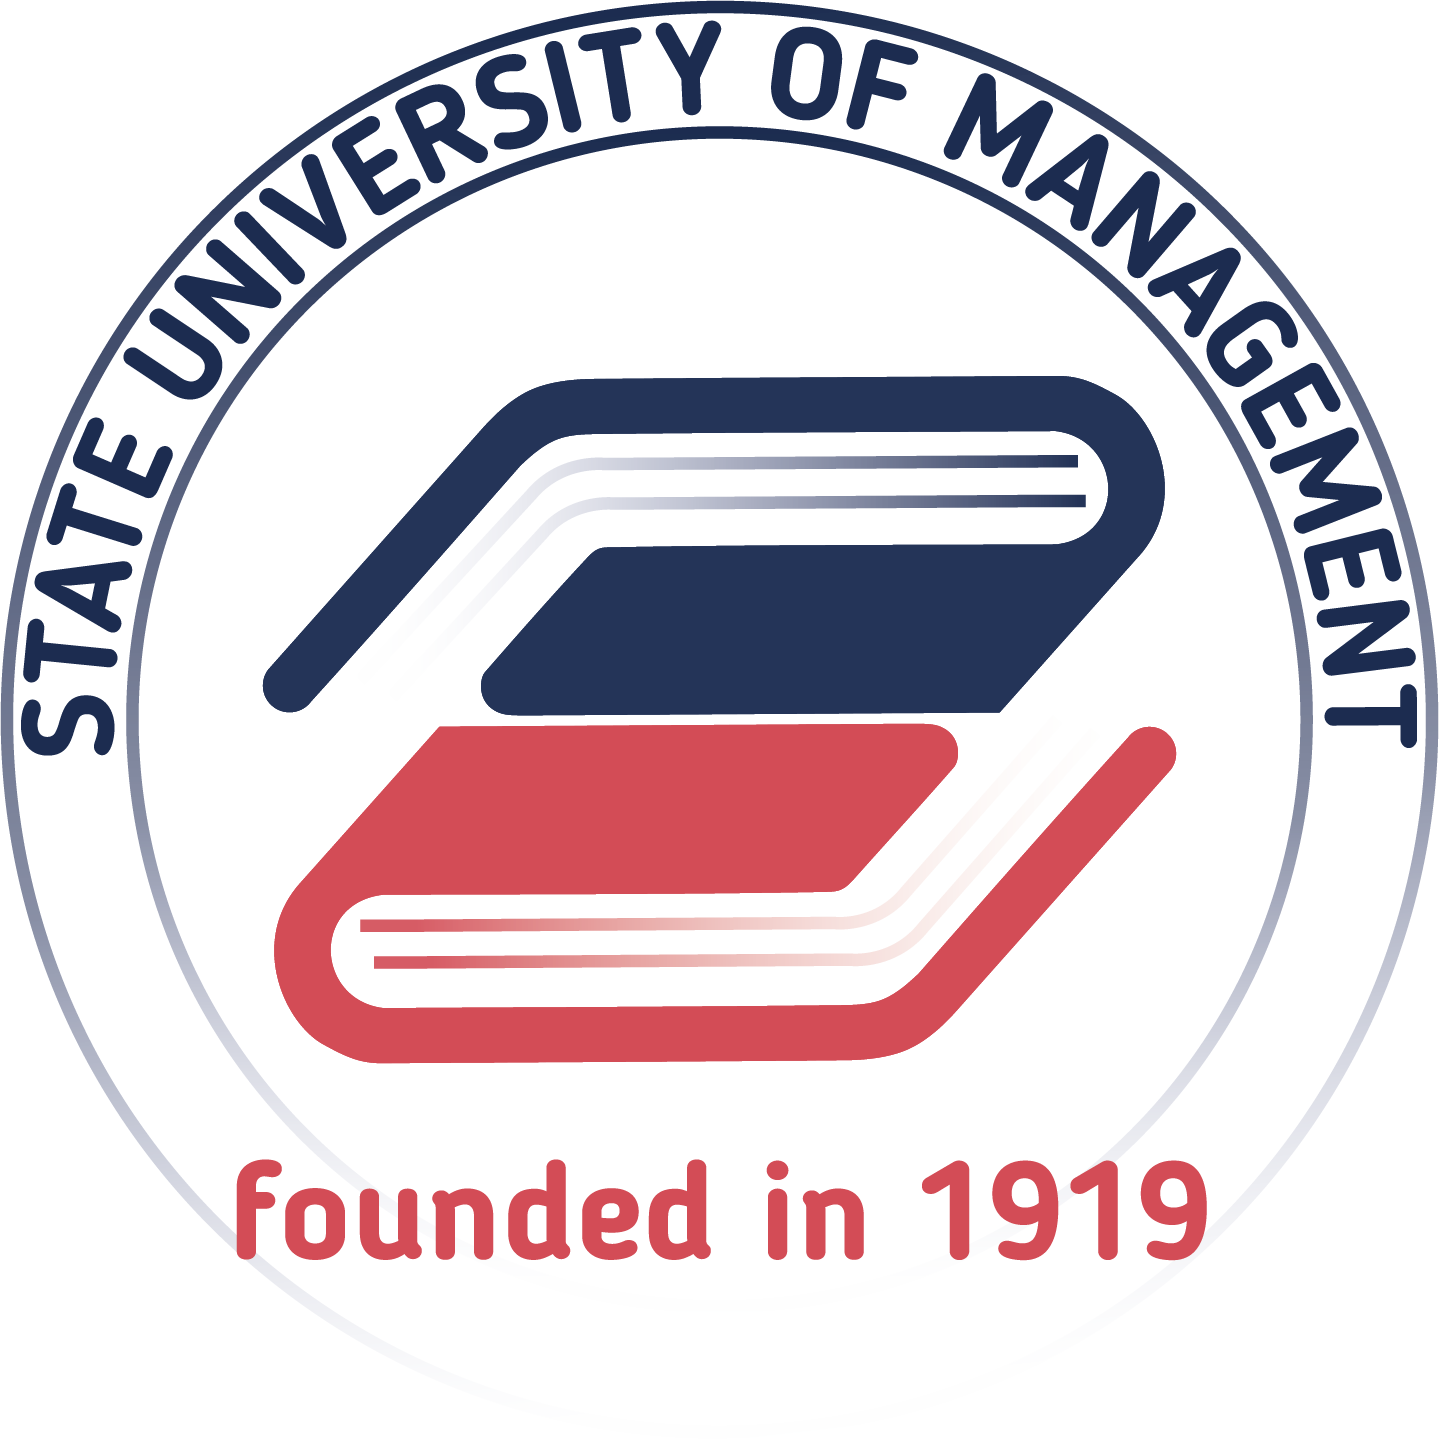 The State University of Management. Founded in 1919